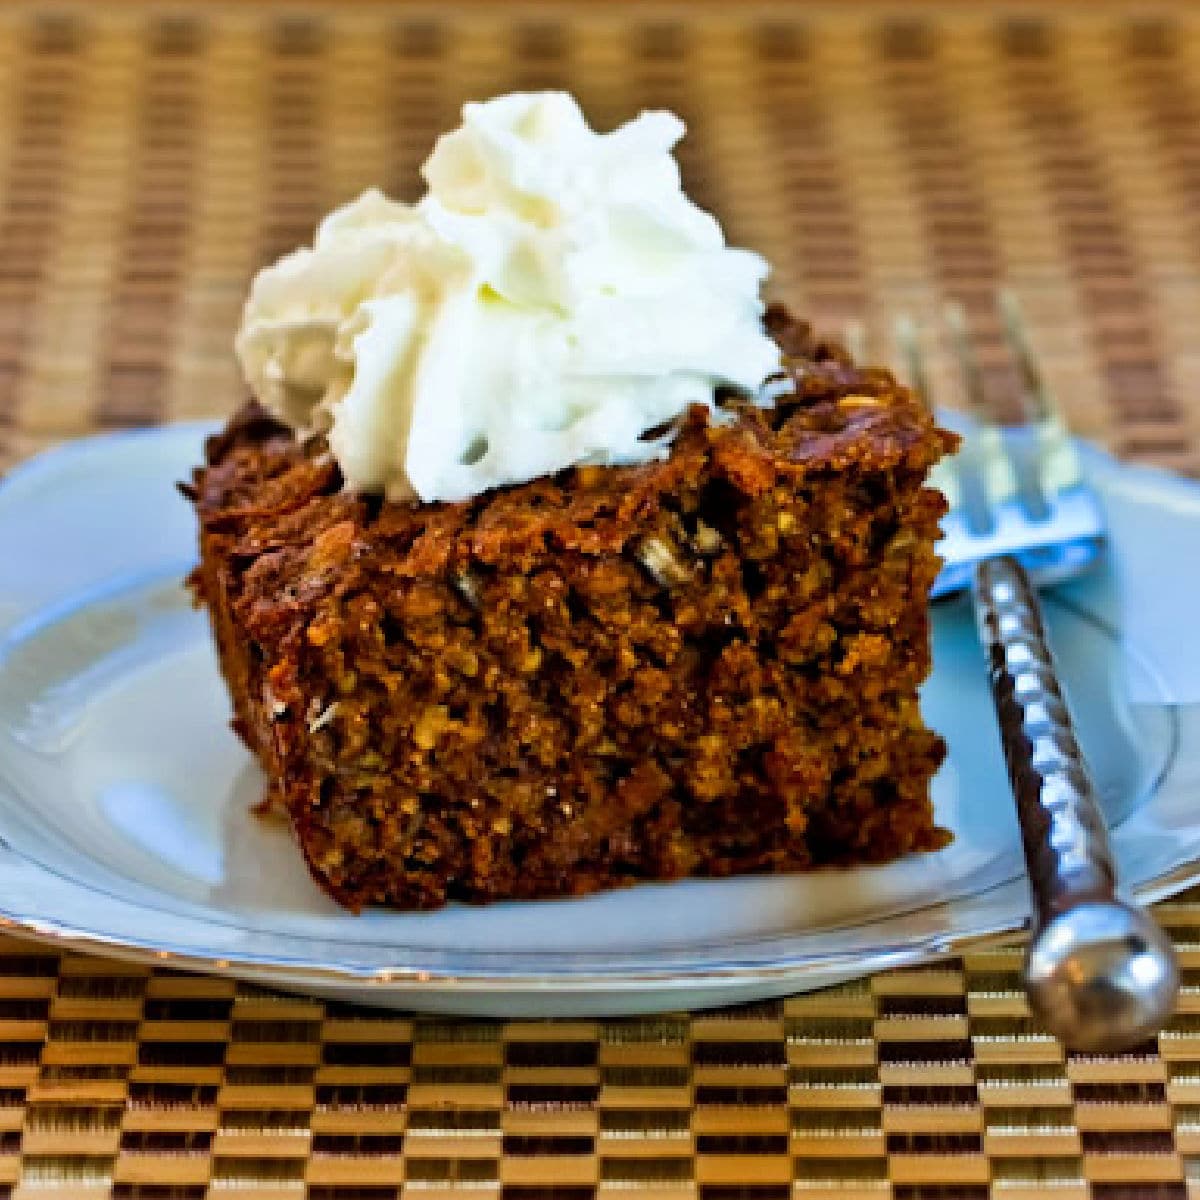 Oatmeal Spice Persimmon Cake shown on plate with fork.